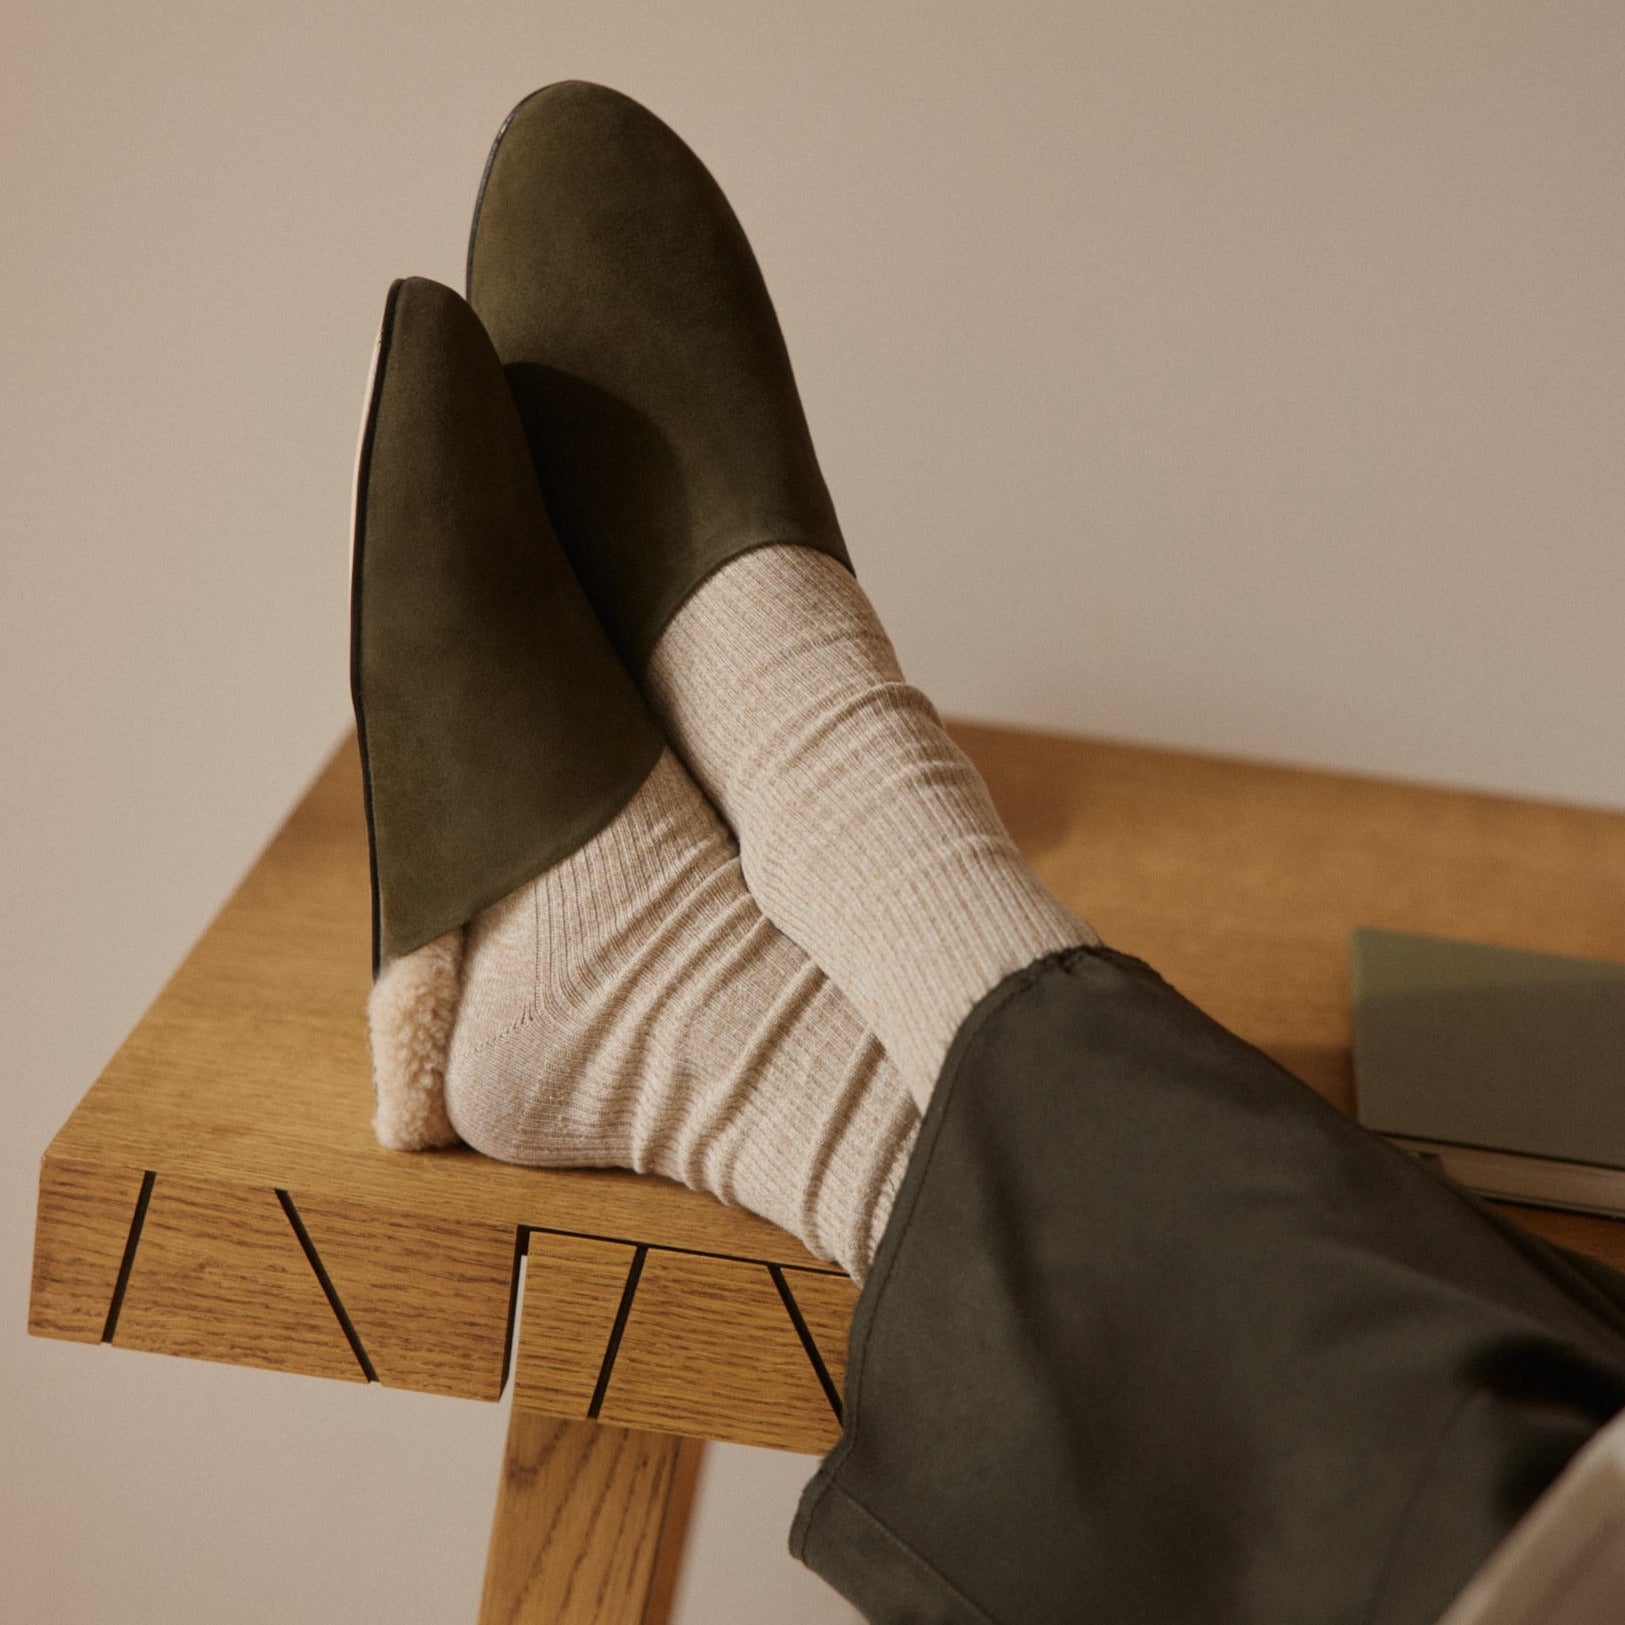 Inabo Men's Slider slippers in army suede and white shearling worn by a man with his feet up on a table